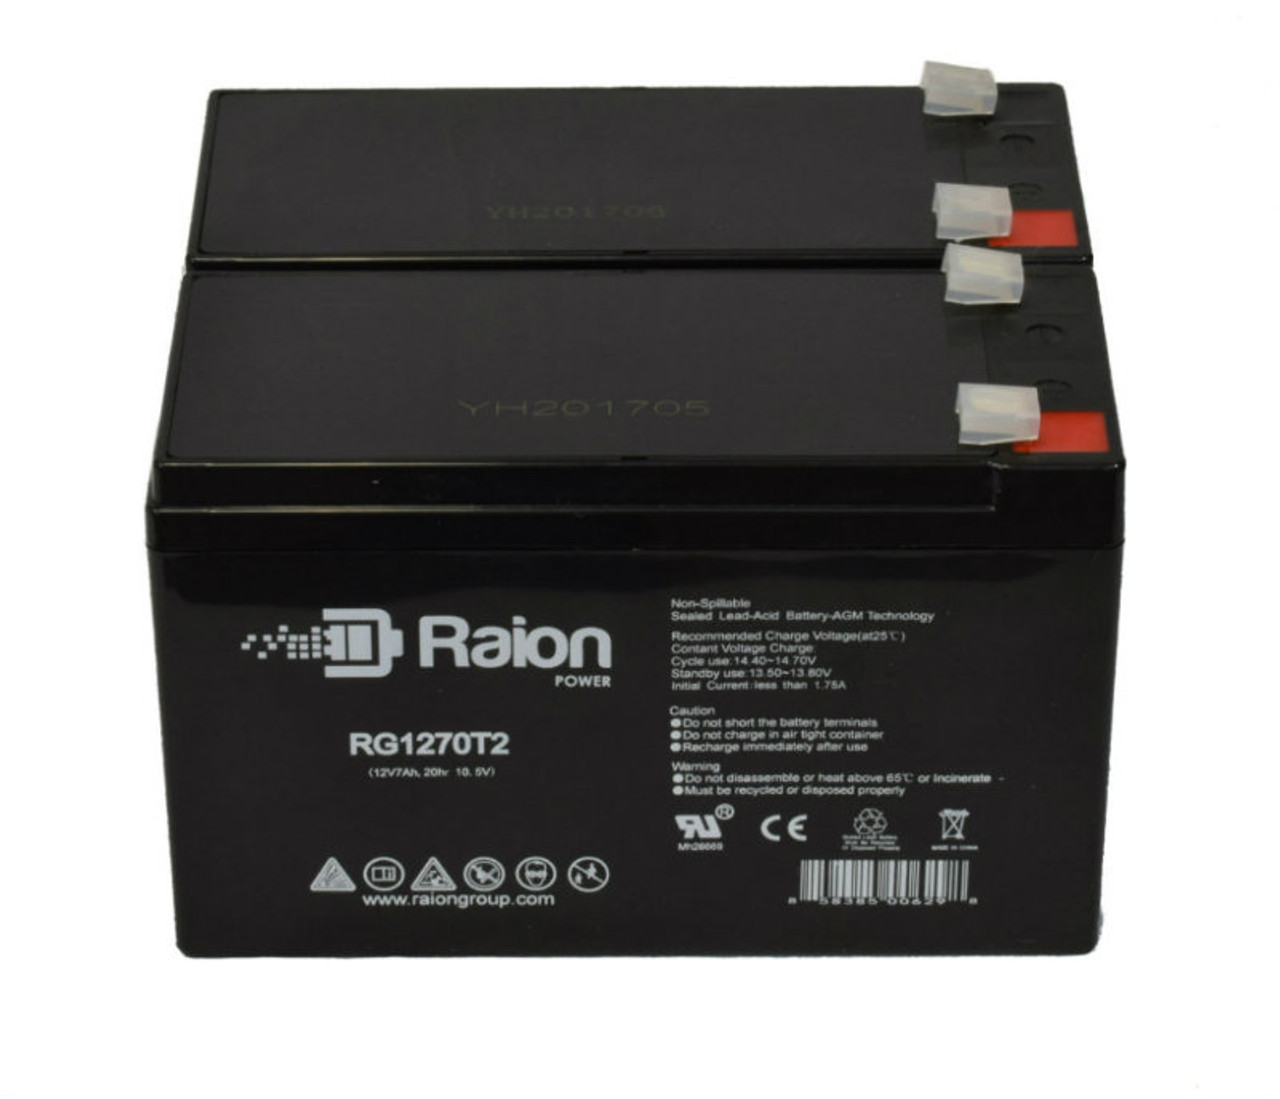 Raion Power Replacement 12V 7Ah Battery for Alexander G1270 - 2 Pack